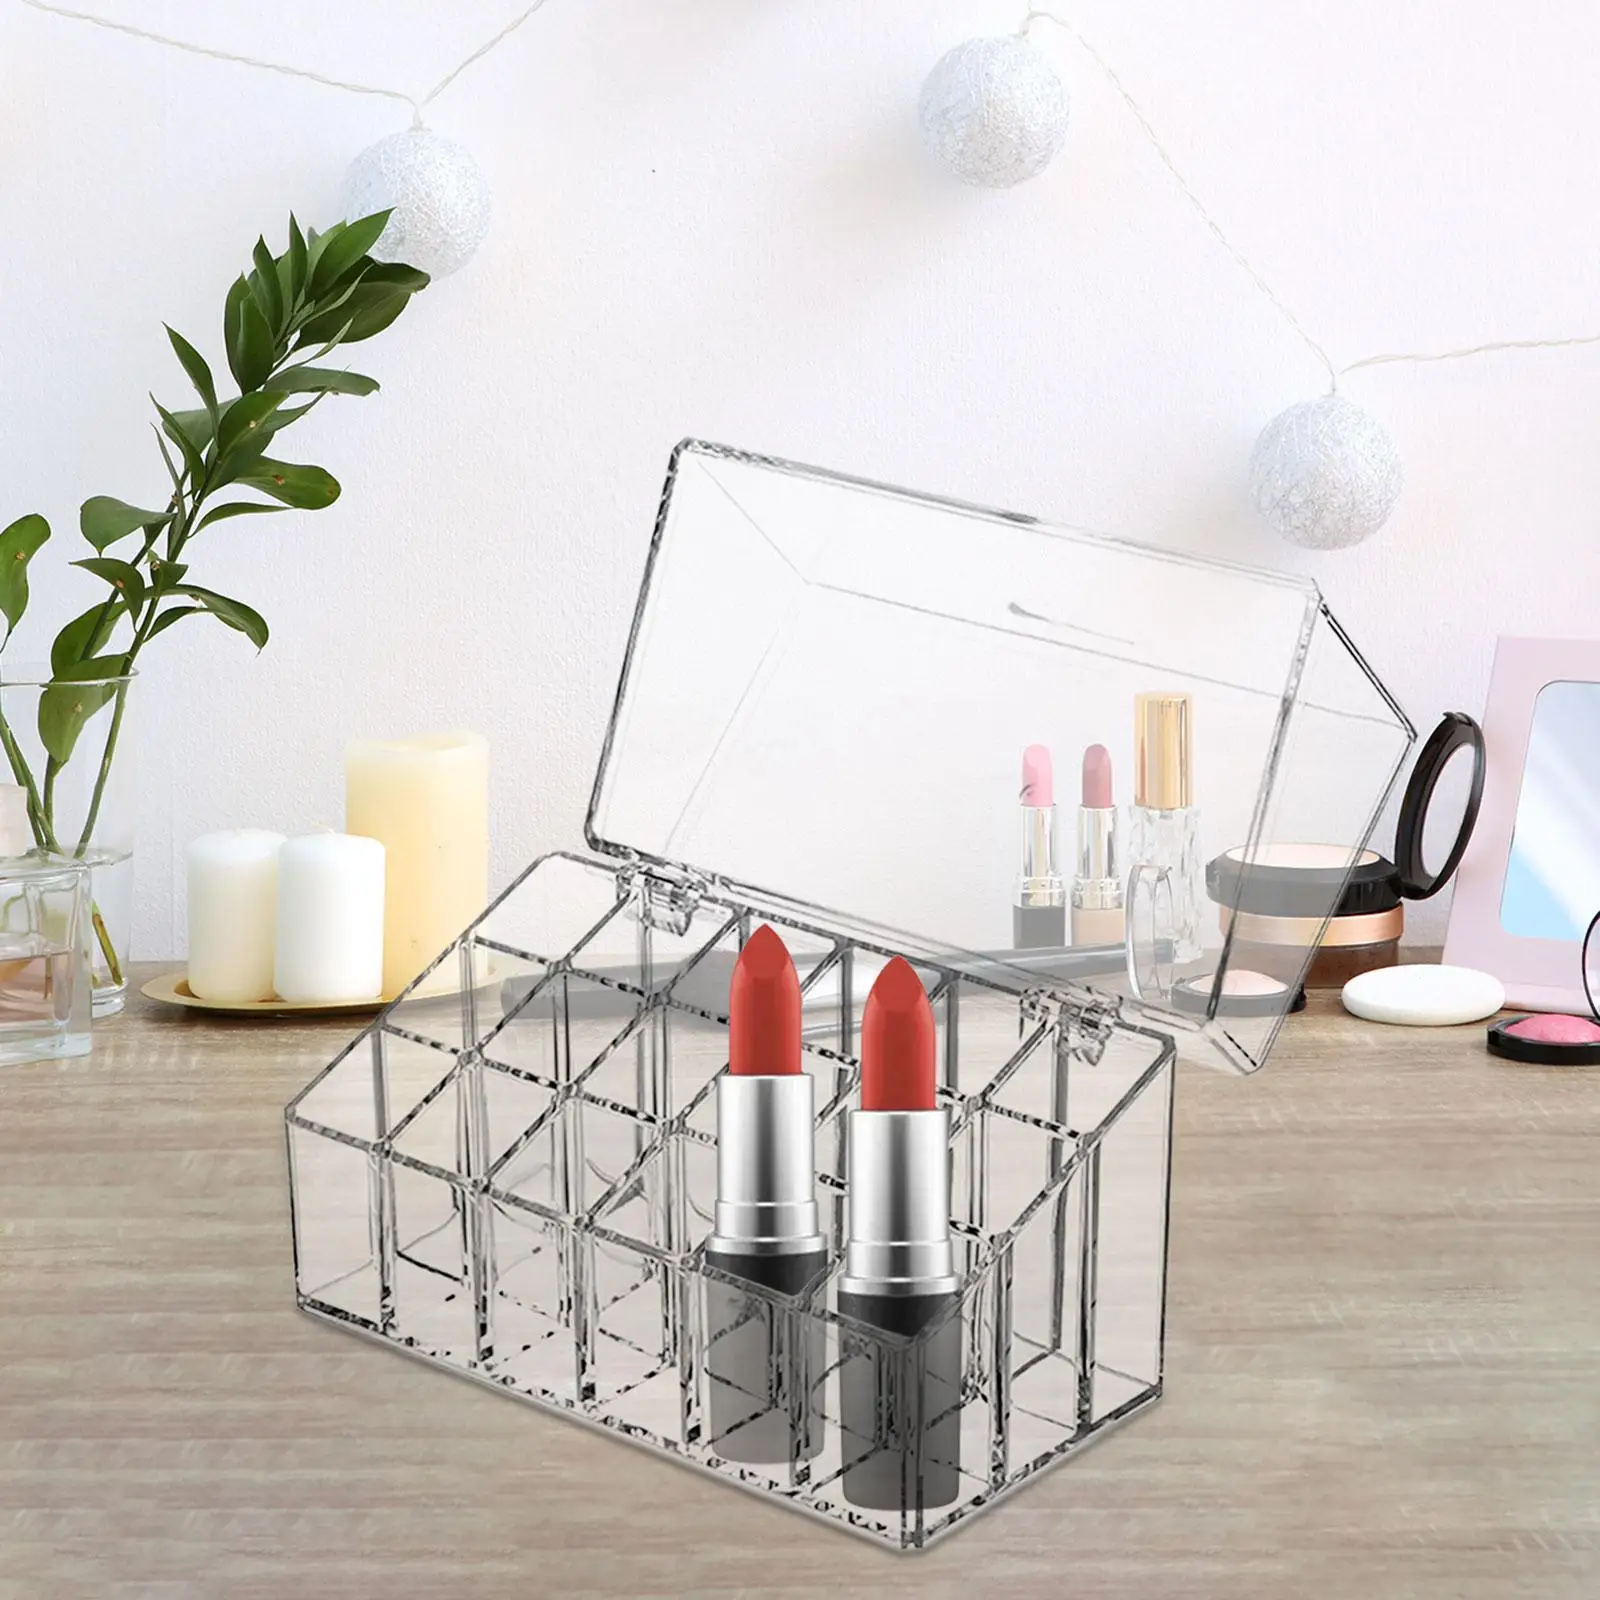 Lipstick Holder Case 18 Compartments Display Stand Decoration for Dresser Countertop for Lip Glosses Lipstick Organizer with Lid